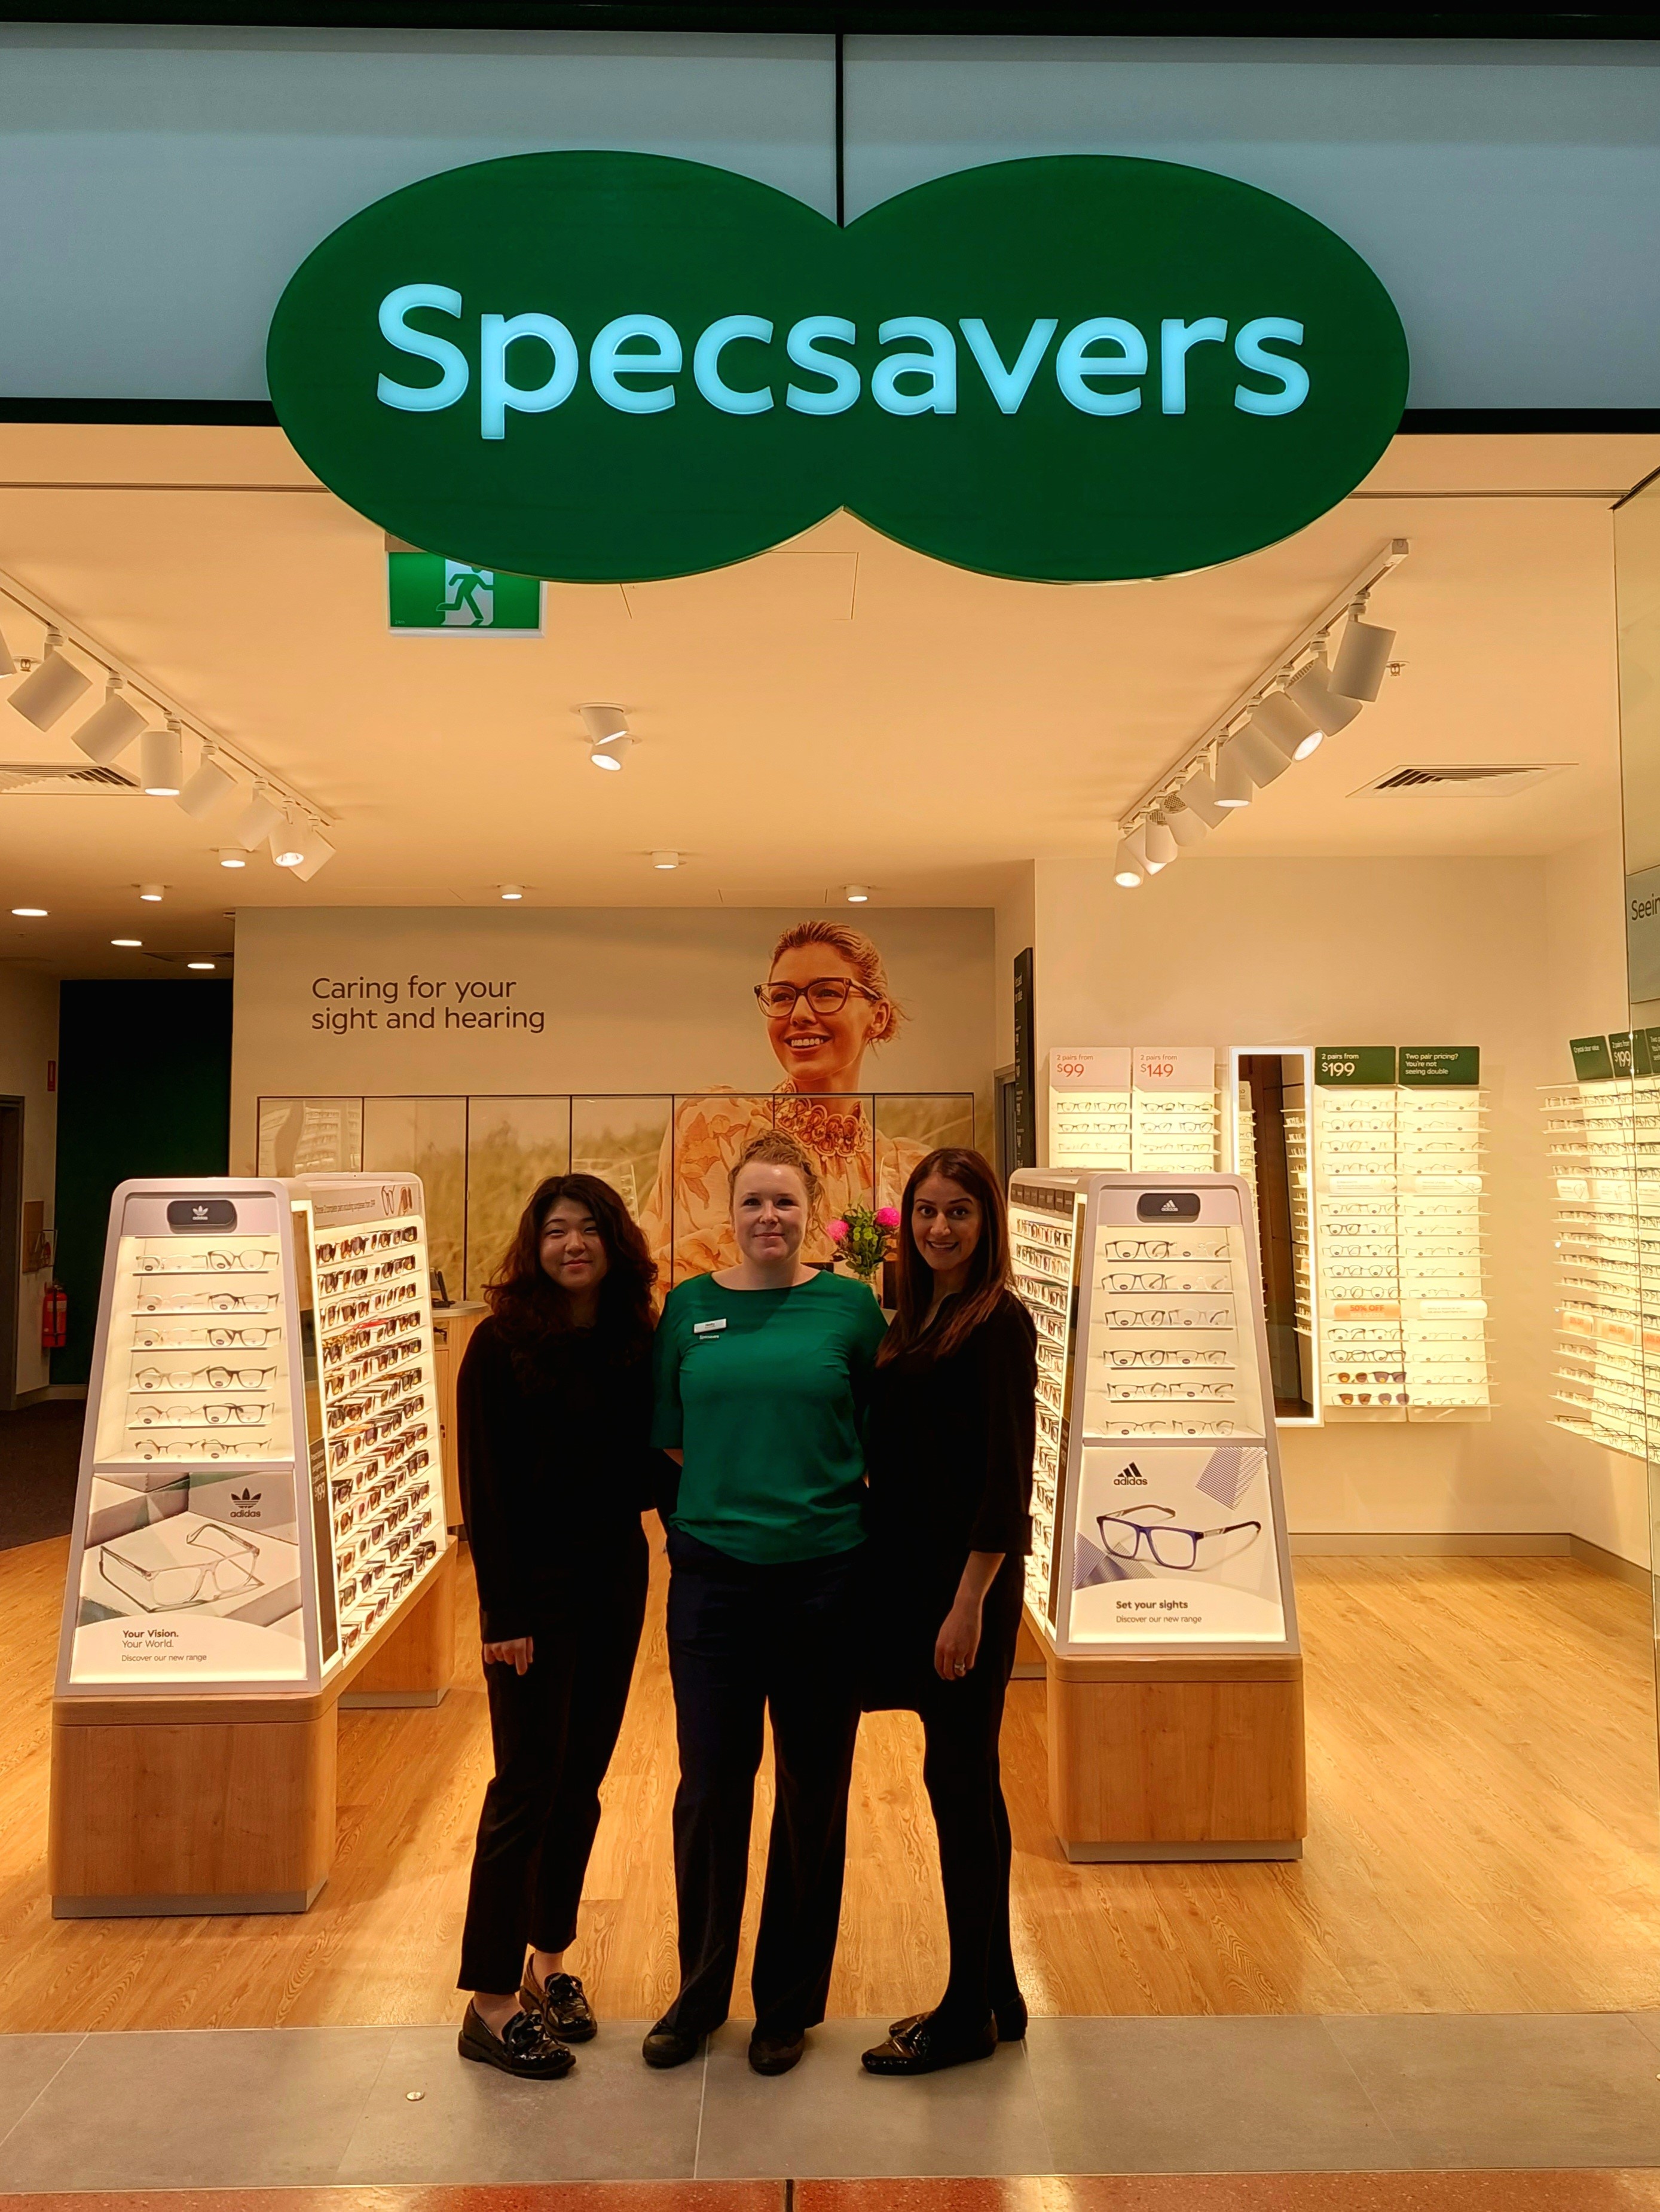 Specsavers Optometrists & Audiology - The Grove Shopping Centre Golden Grove (08) 8252 1022